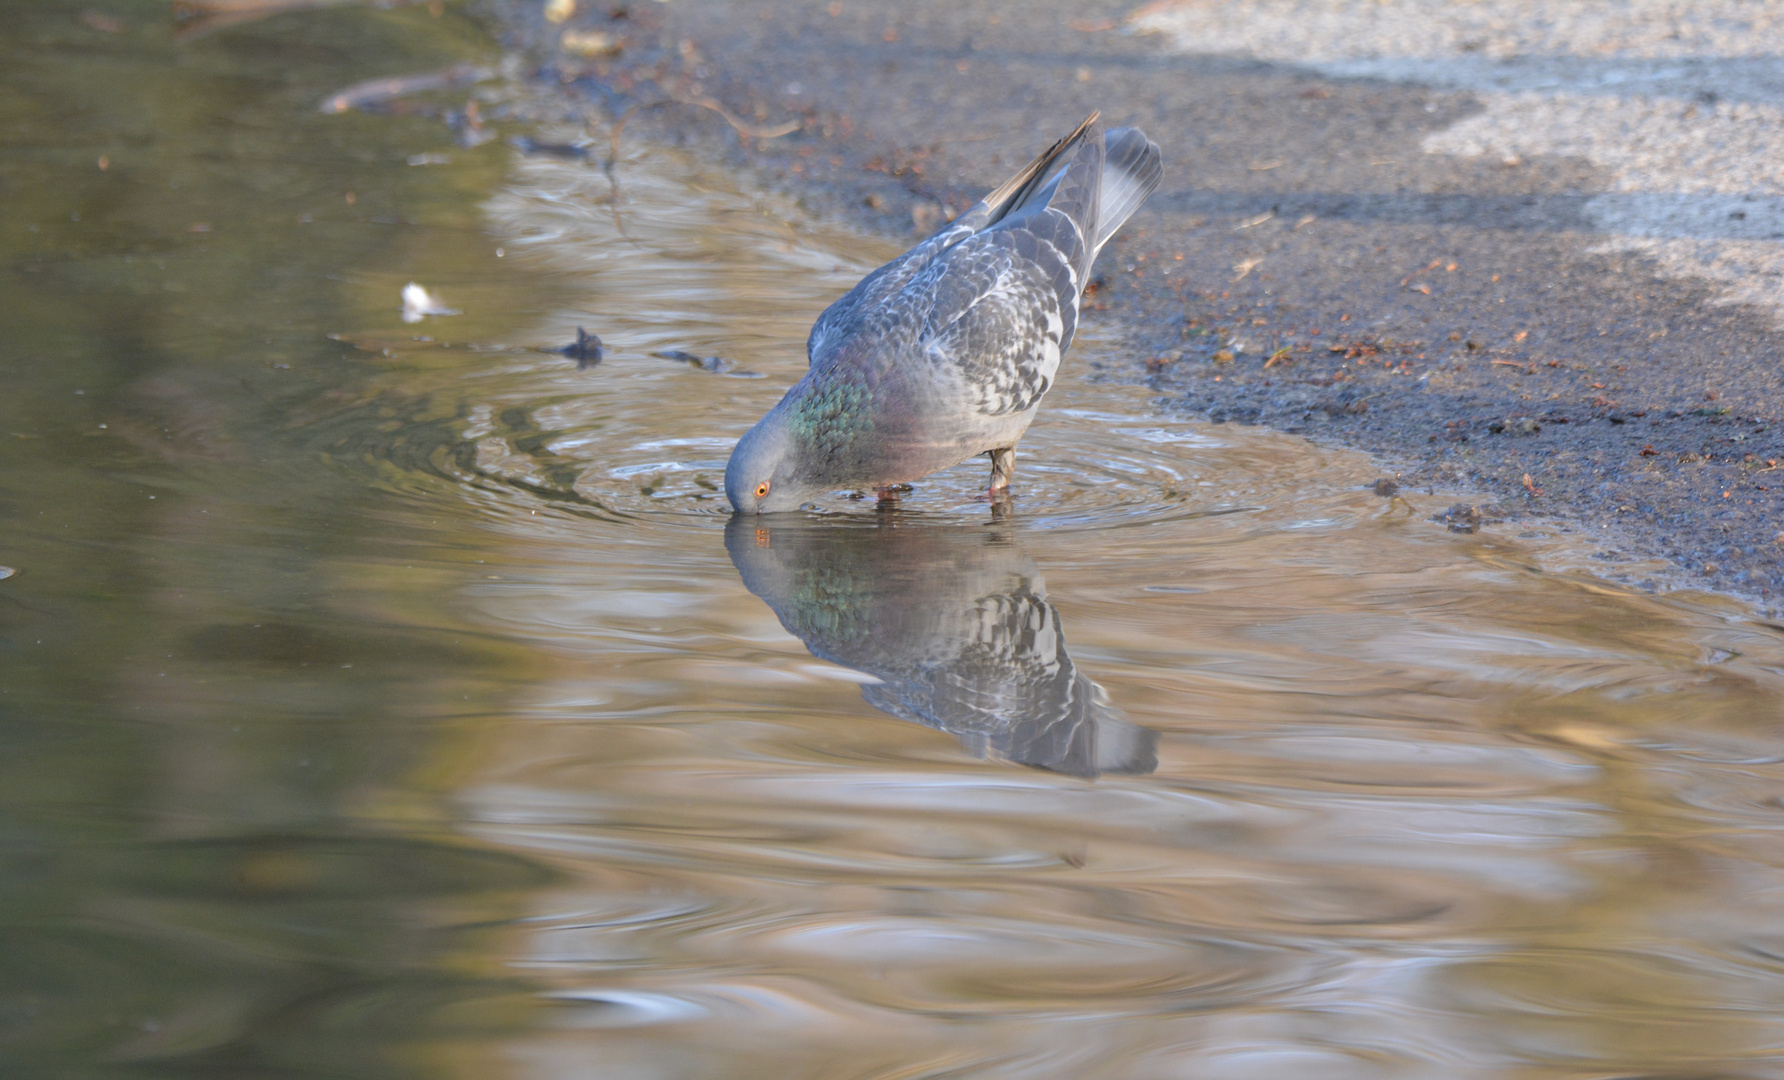 A Dove drinking water to quench its thirst.